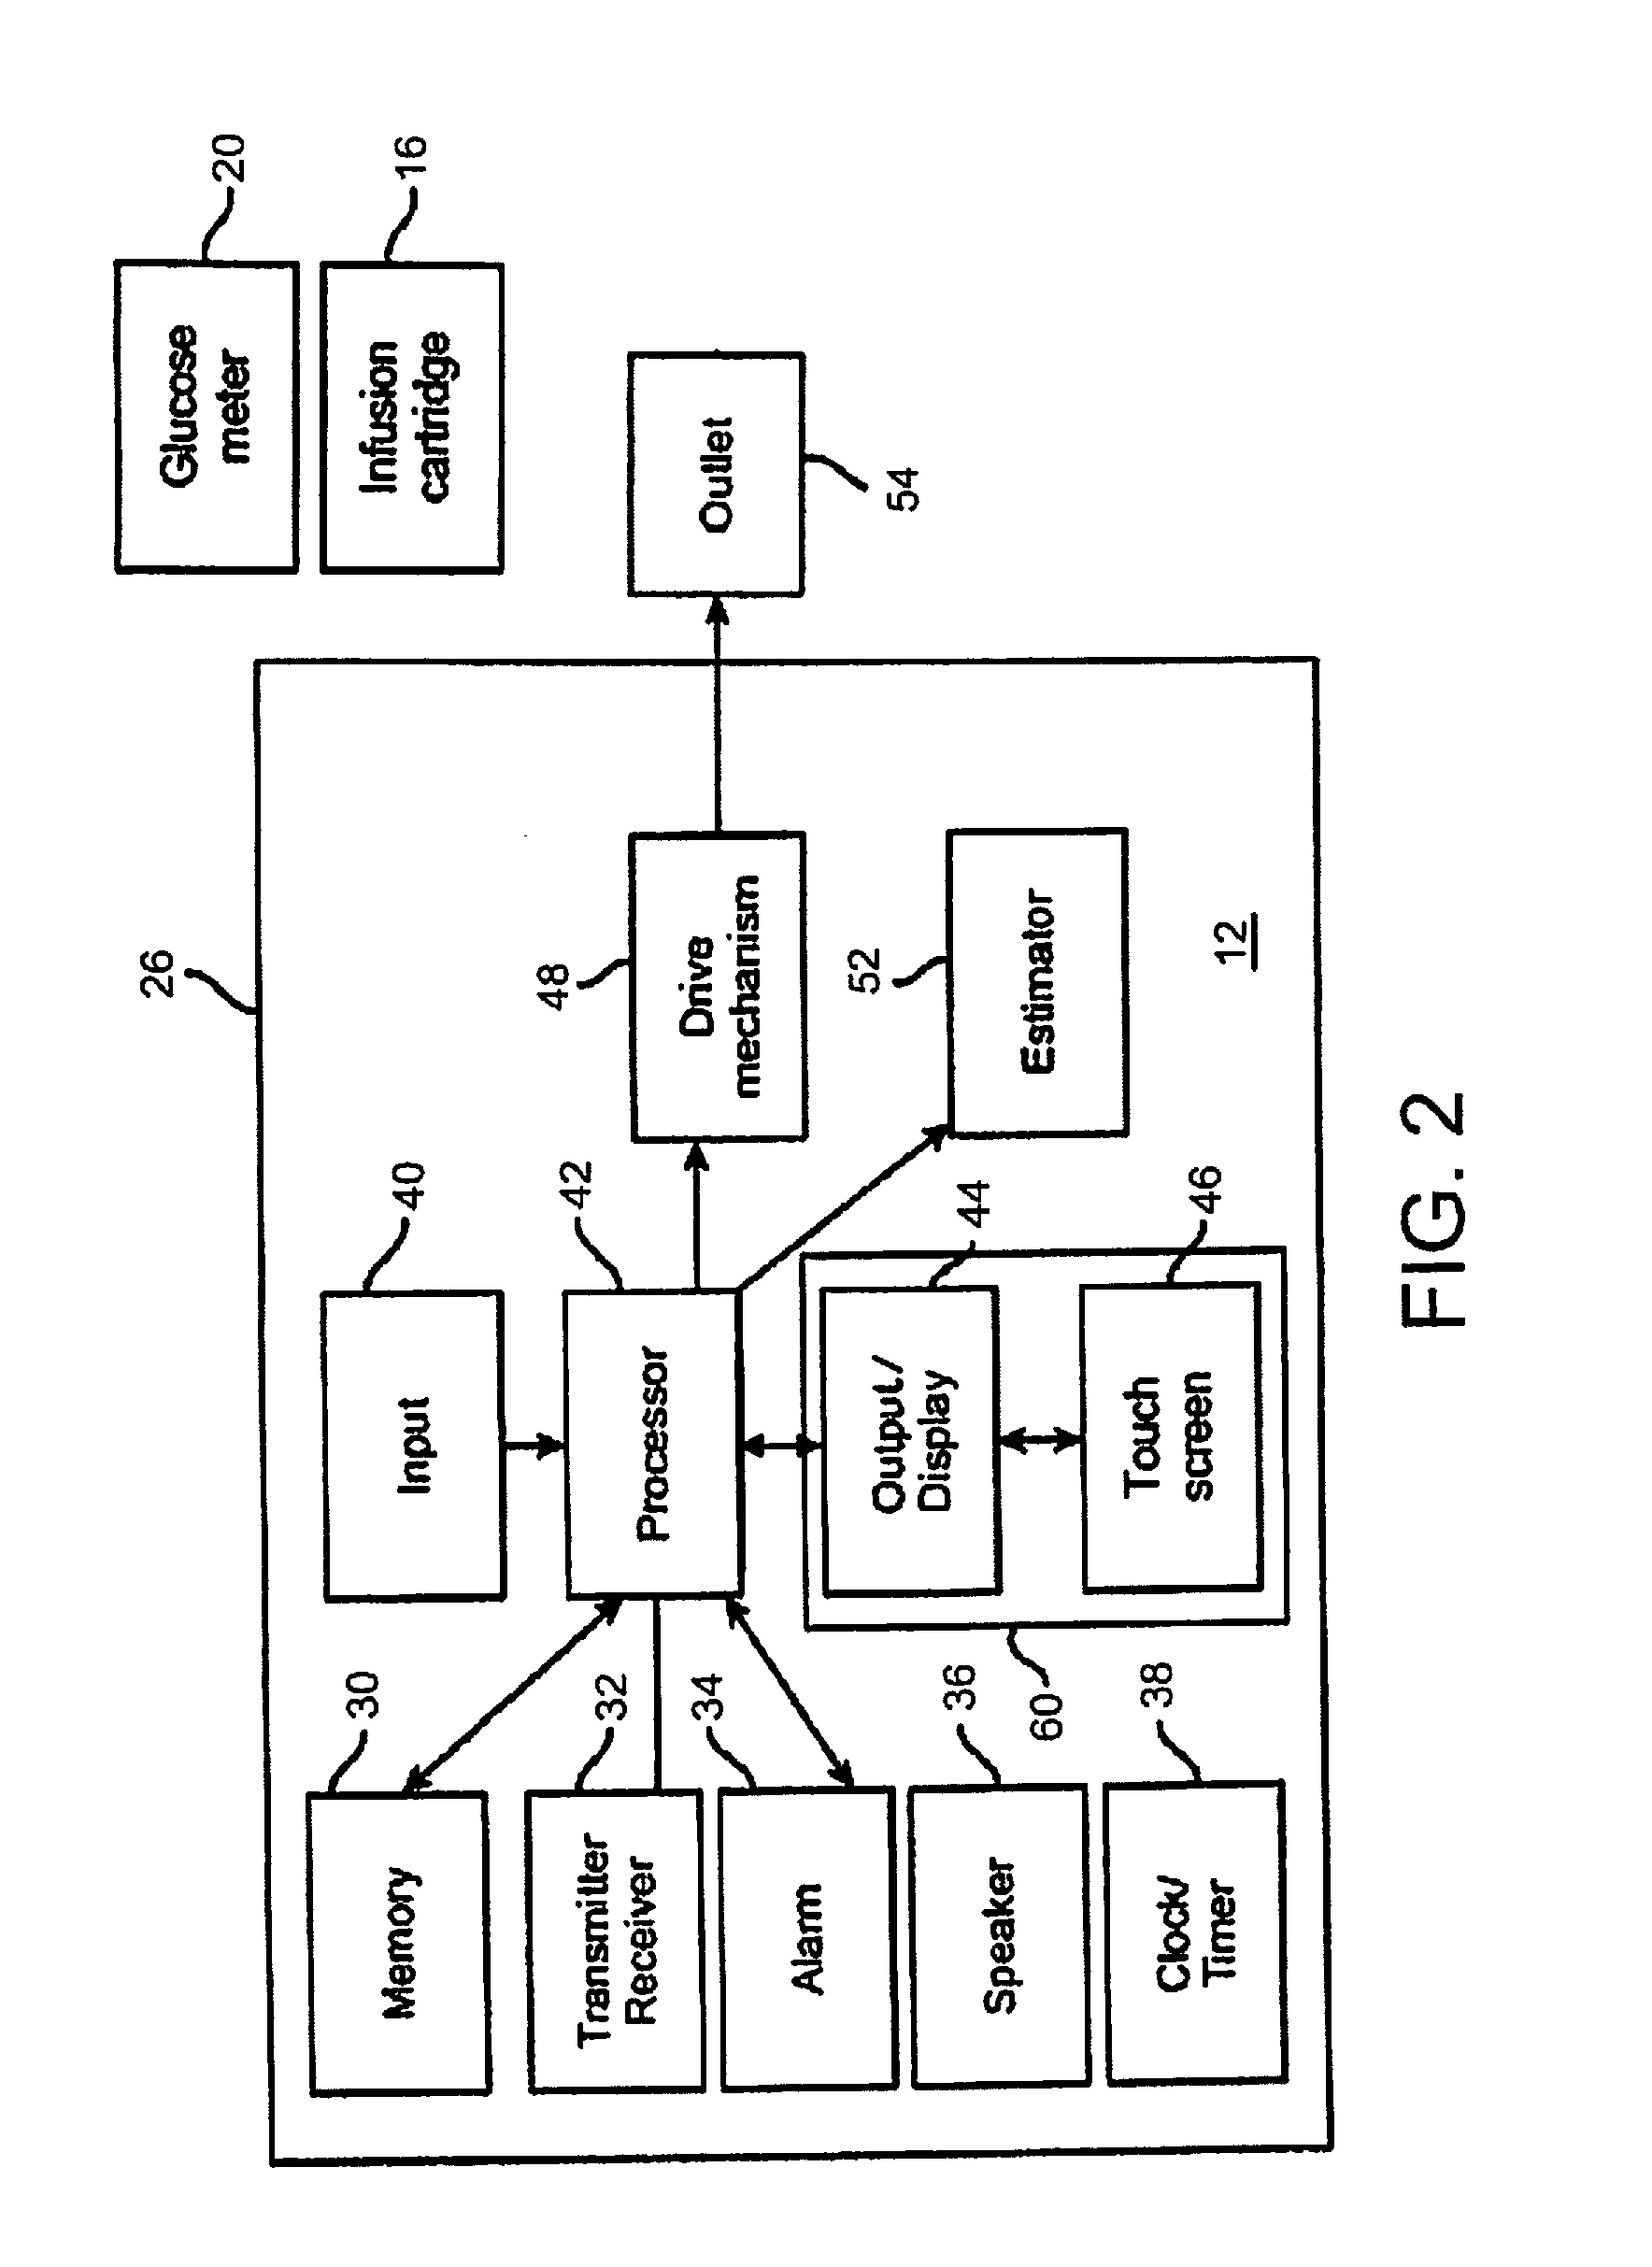 System and method for modifying medicament delivery parameters after a site change